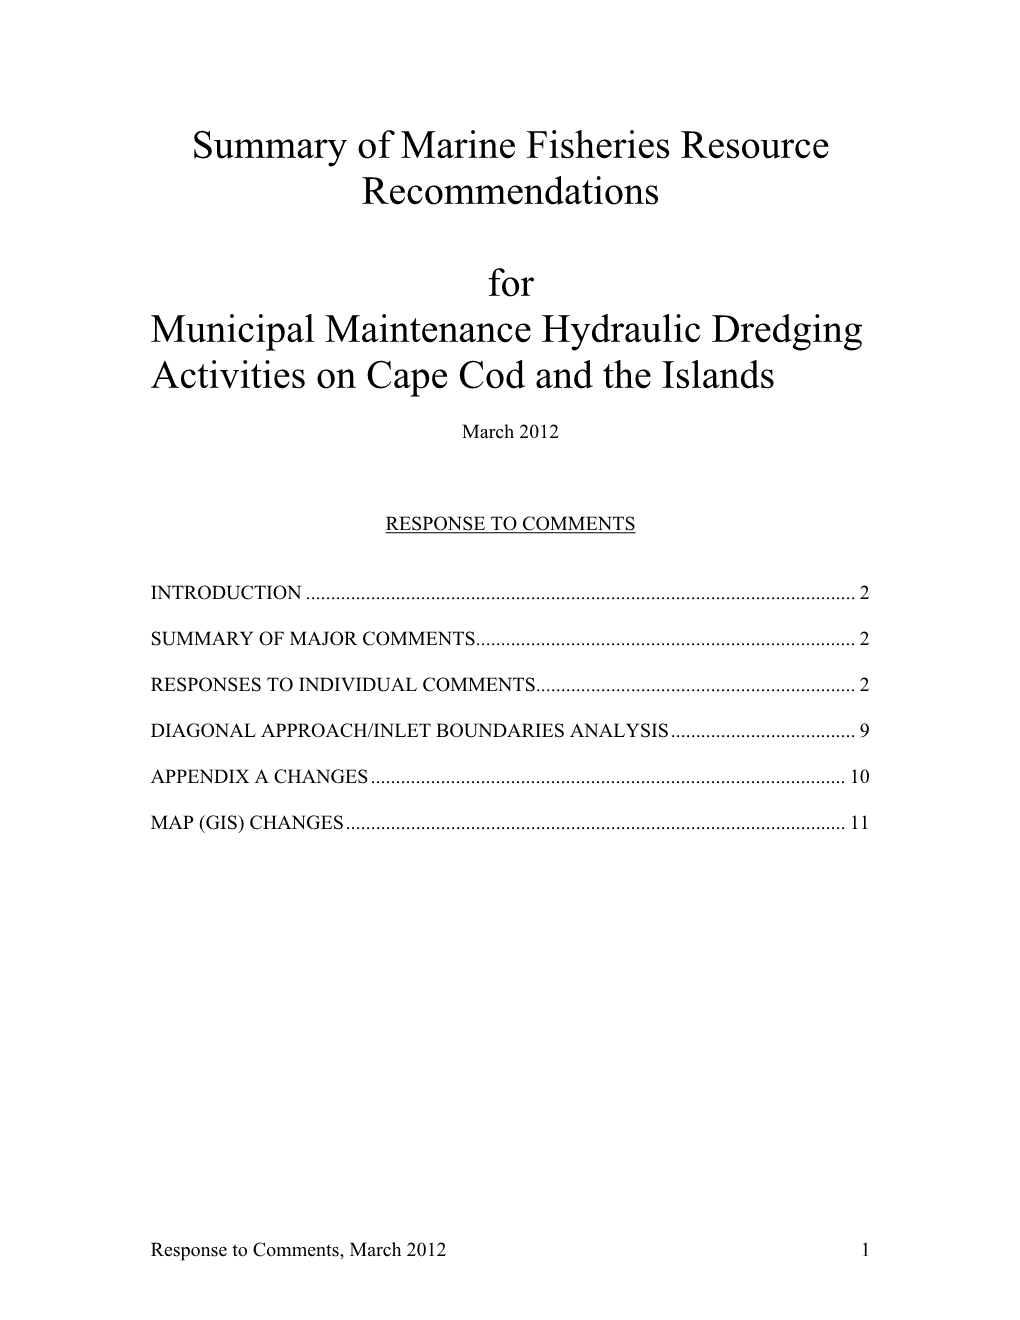 Summary of Marine Fisheries Resource Recommendations For